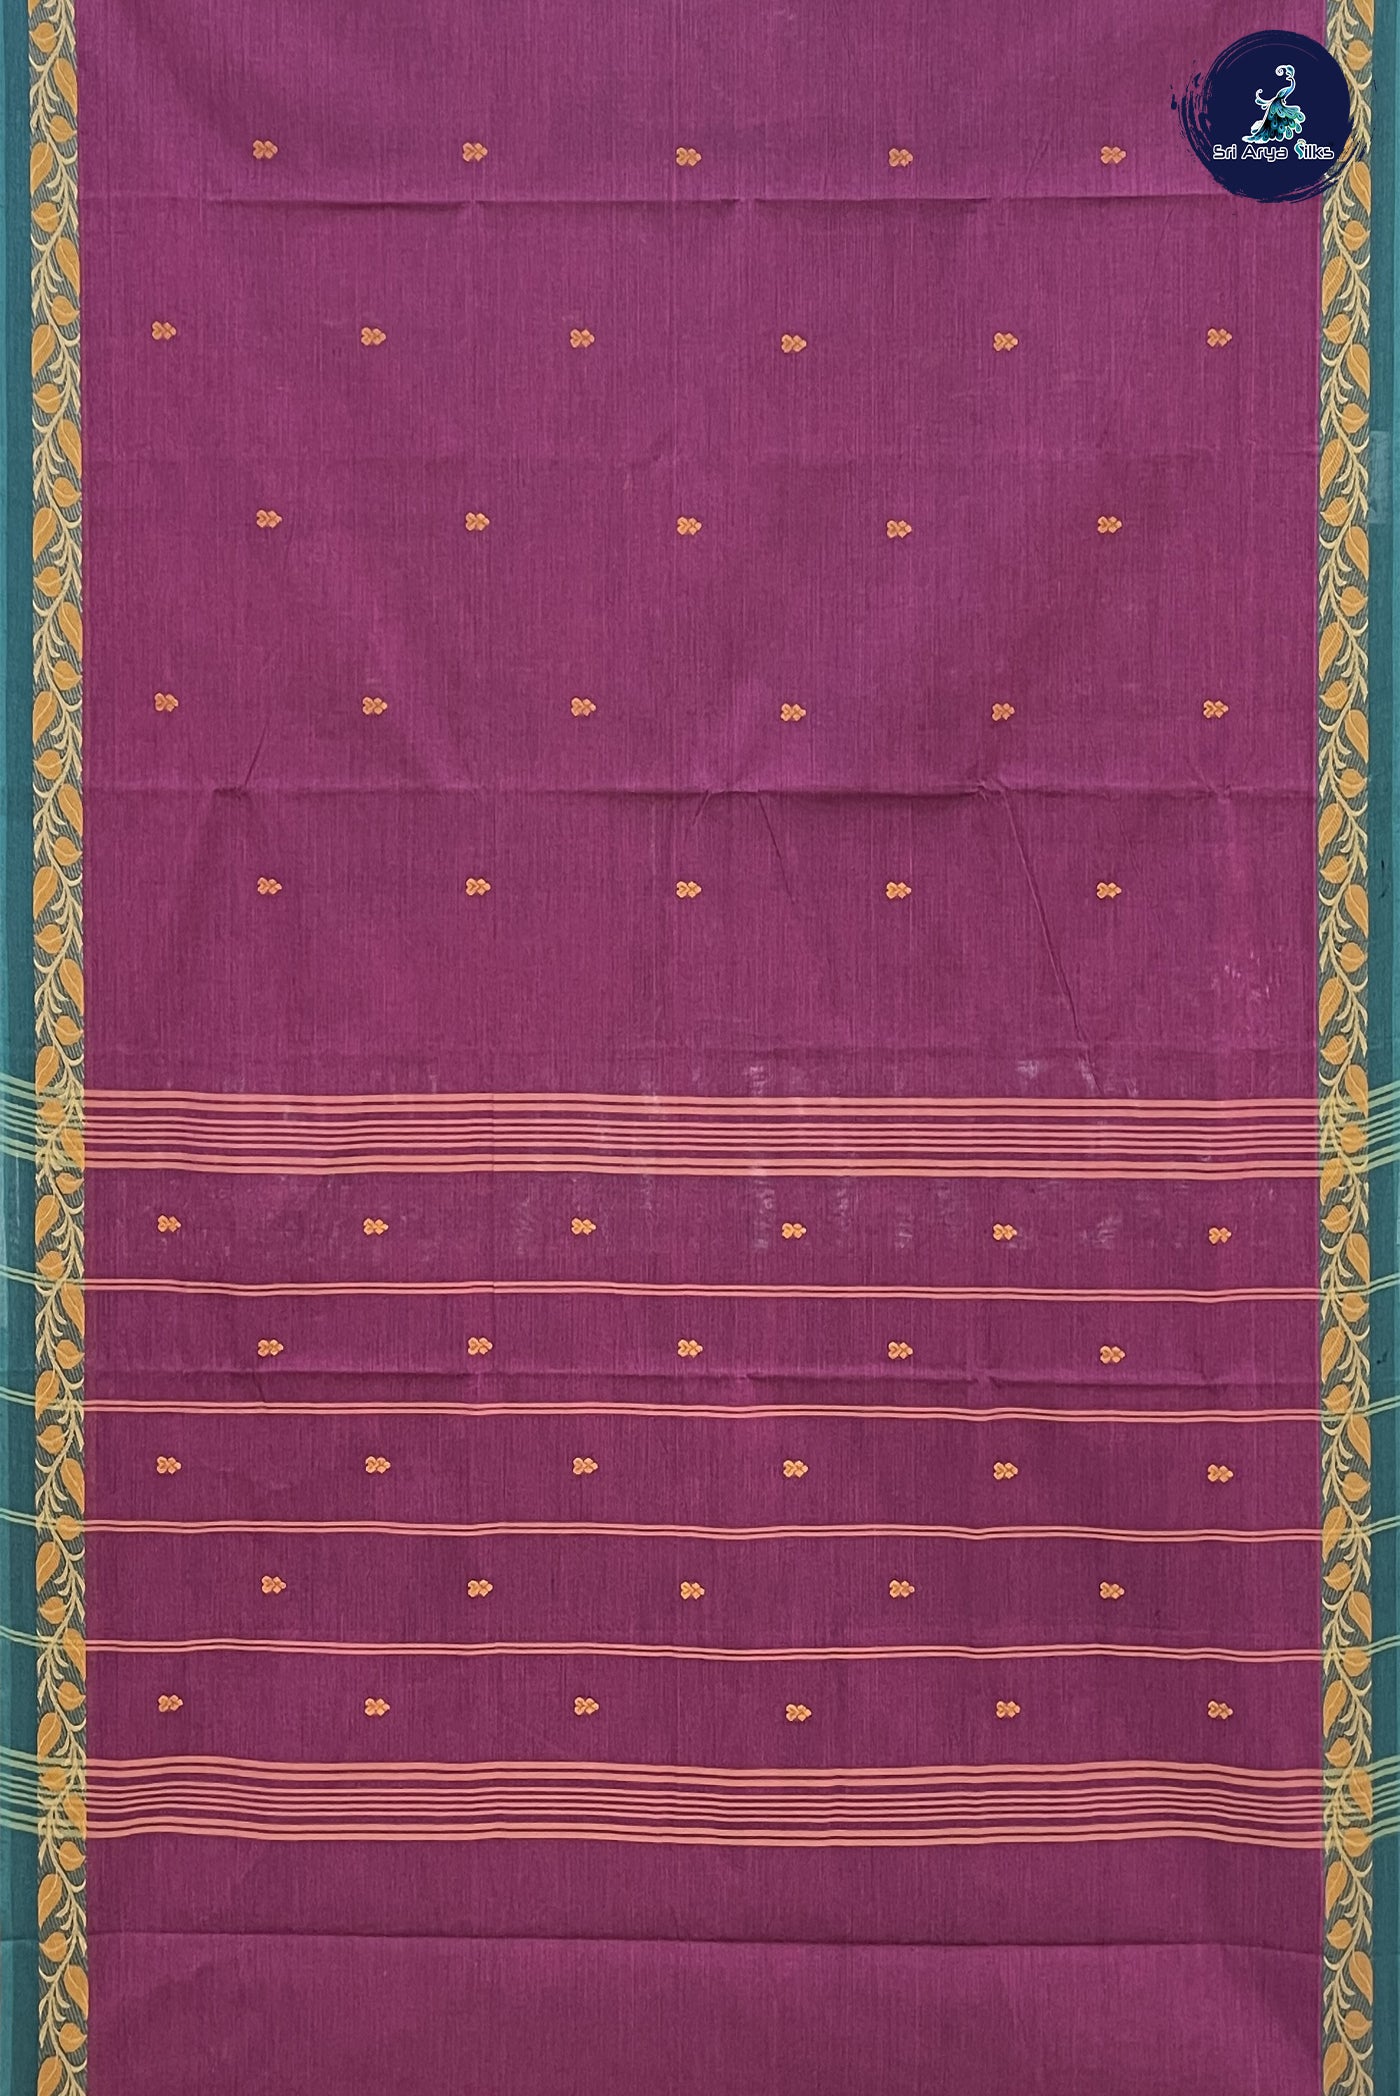 BeetRoot Shade Cotton Saree With Buttas Pattern